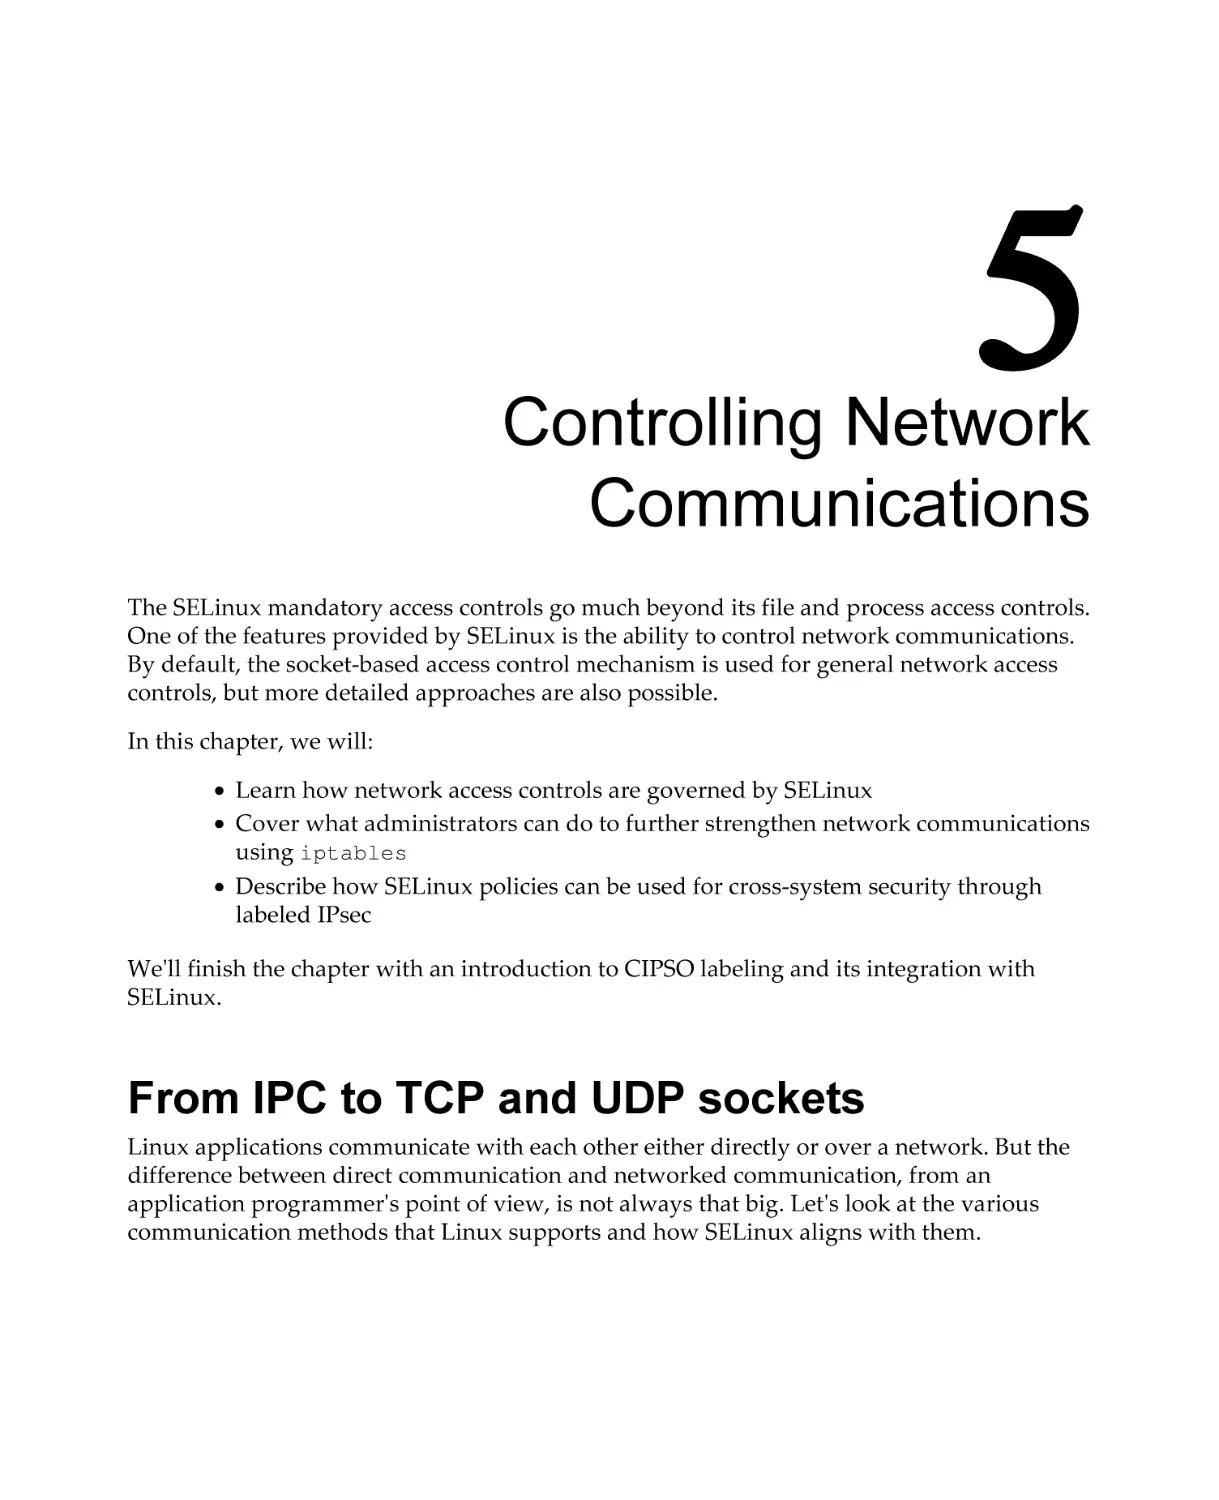 Chapter 5
From IPC to TCP and UDP sockets